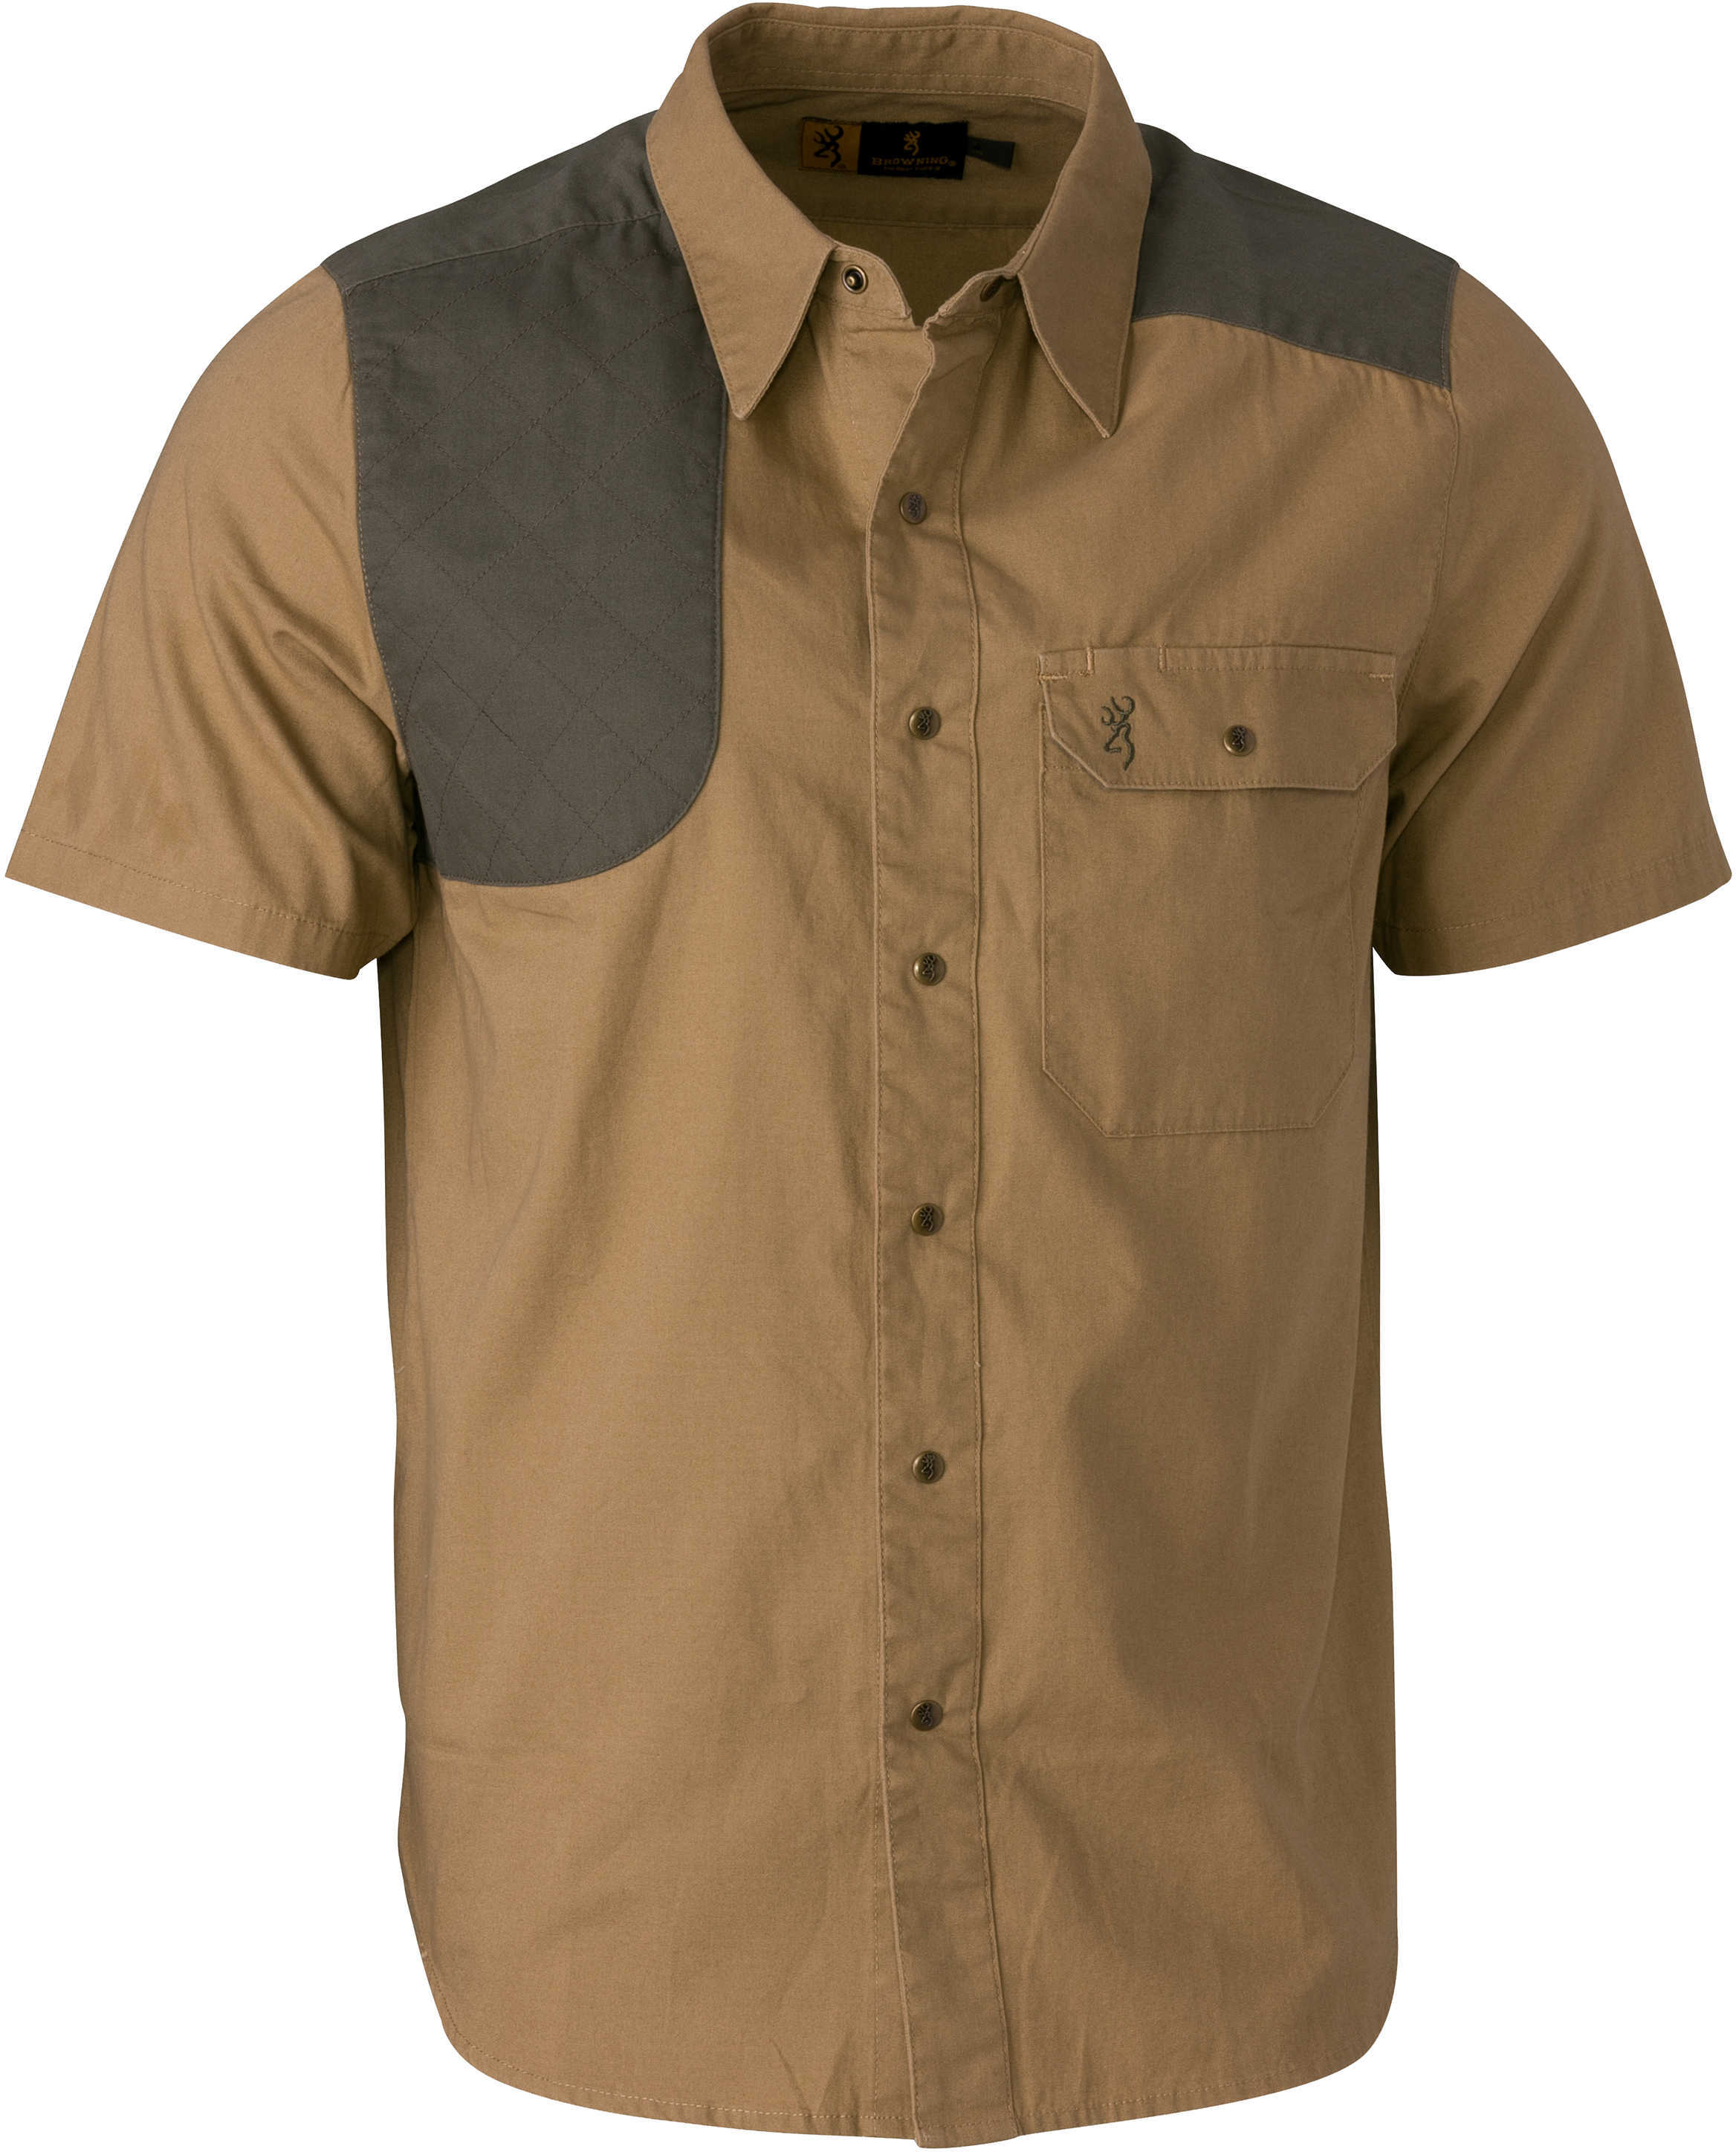 Browning Austin Shooting Shirt, Short Sleeve Taupe/Loden, X-Large Md: 3010657804